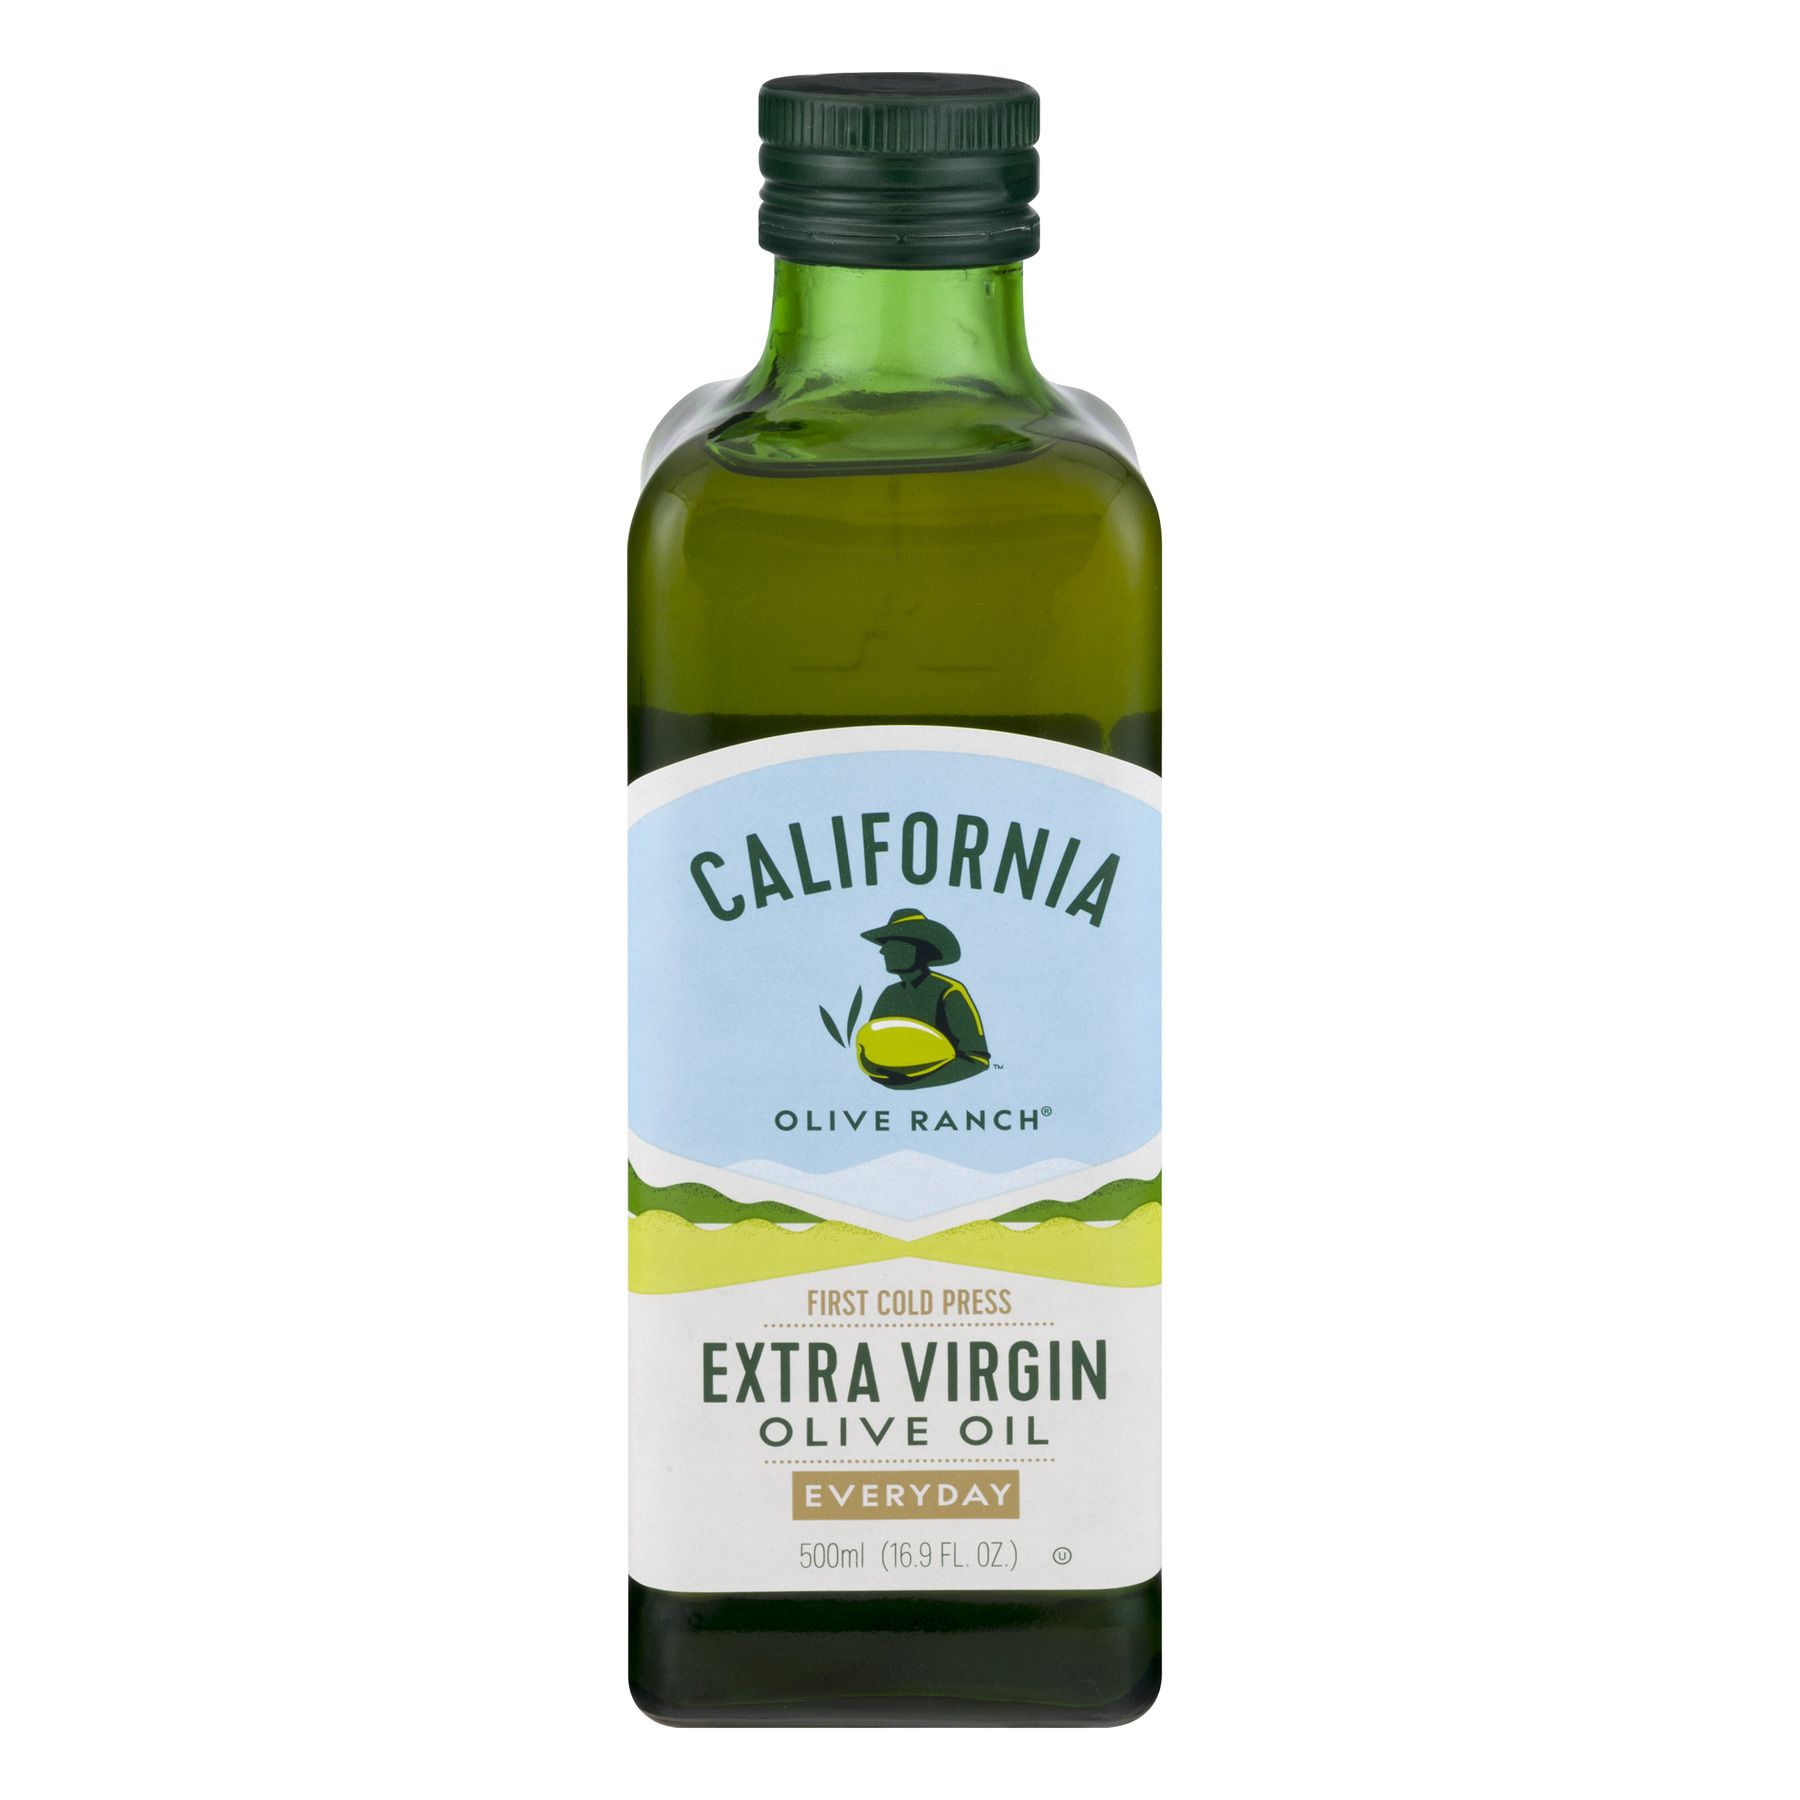 California Olive Ranch Olive Oil Extra Virgin